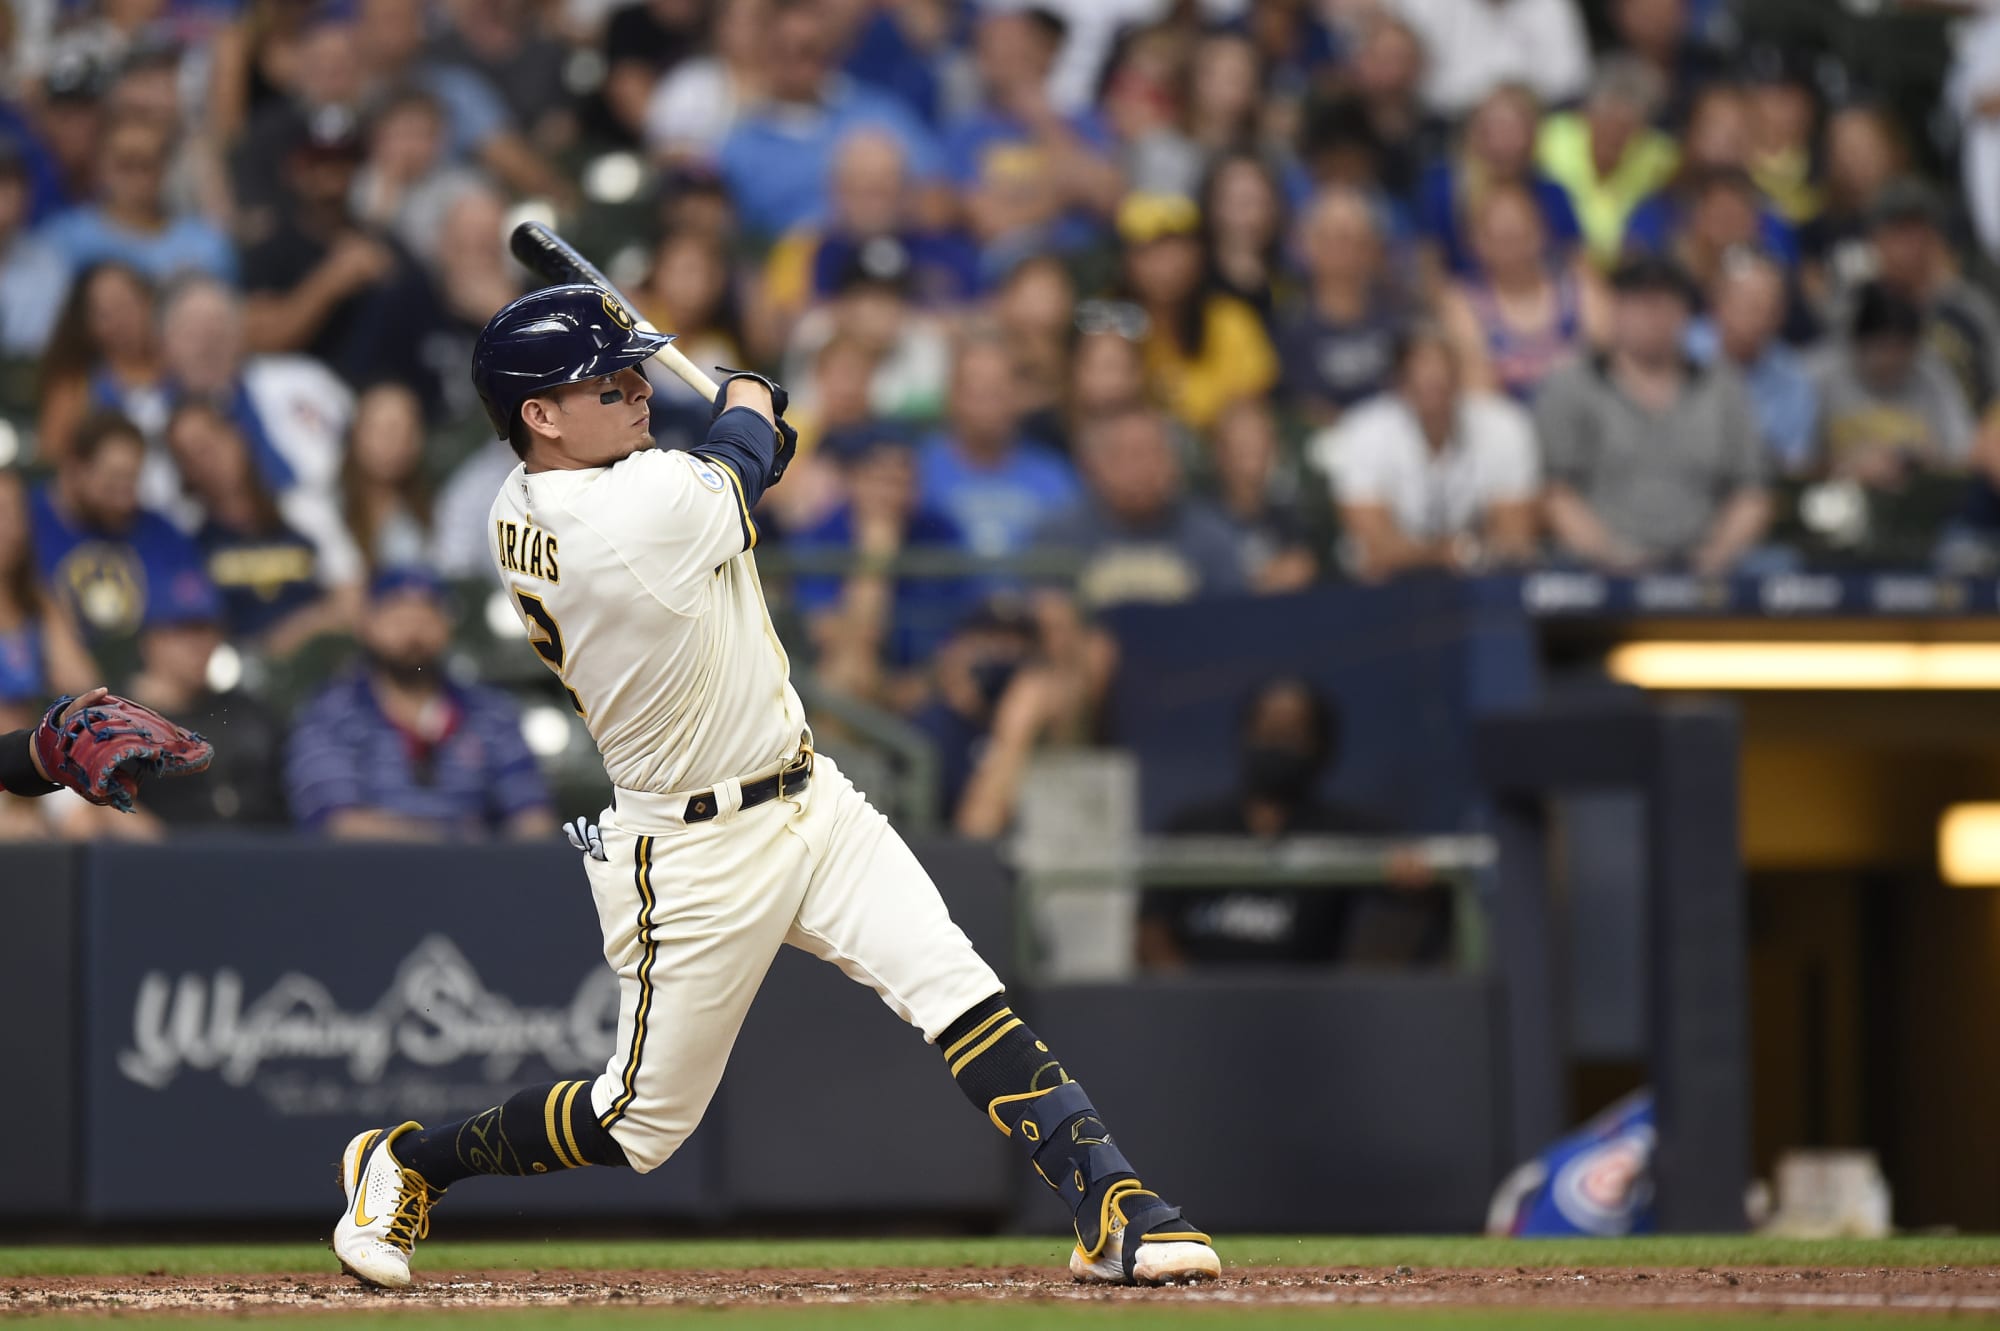 Luis Urias will debut for Brewers against Reds in 2022